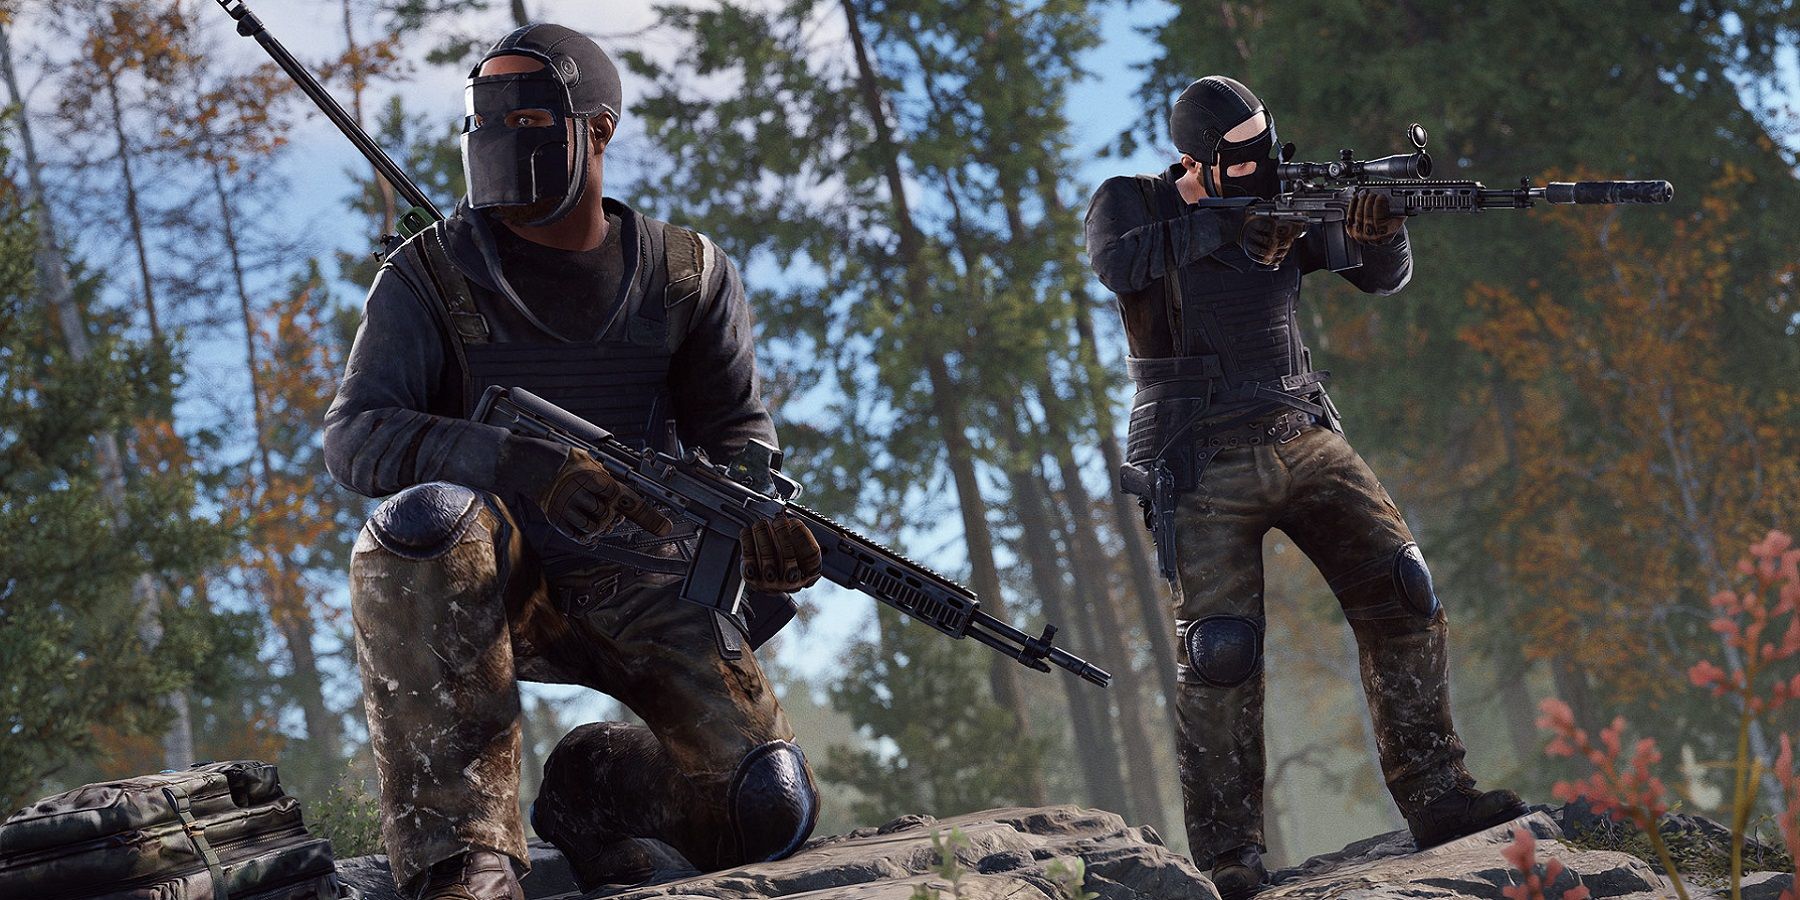 Image from Rust showing two characters holding guns.